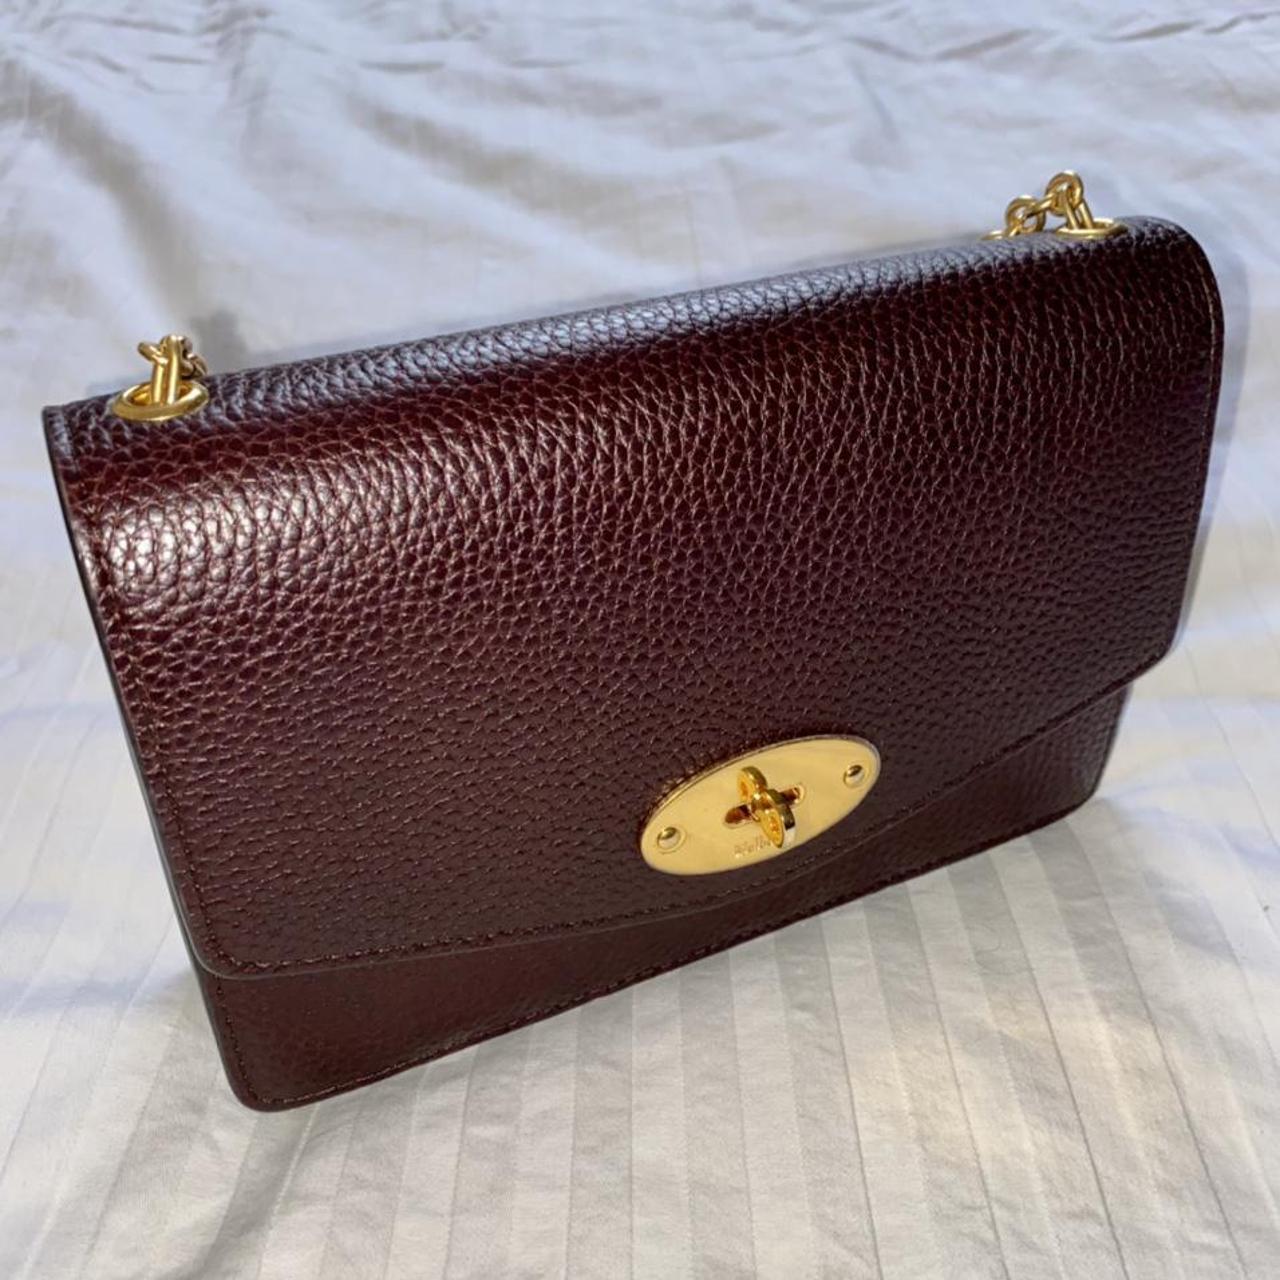 Does anyone have experience with the Mulberry Small Darley? : r/handbags